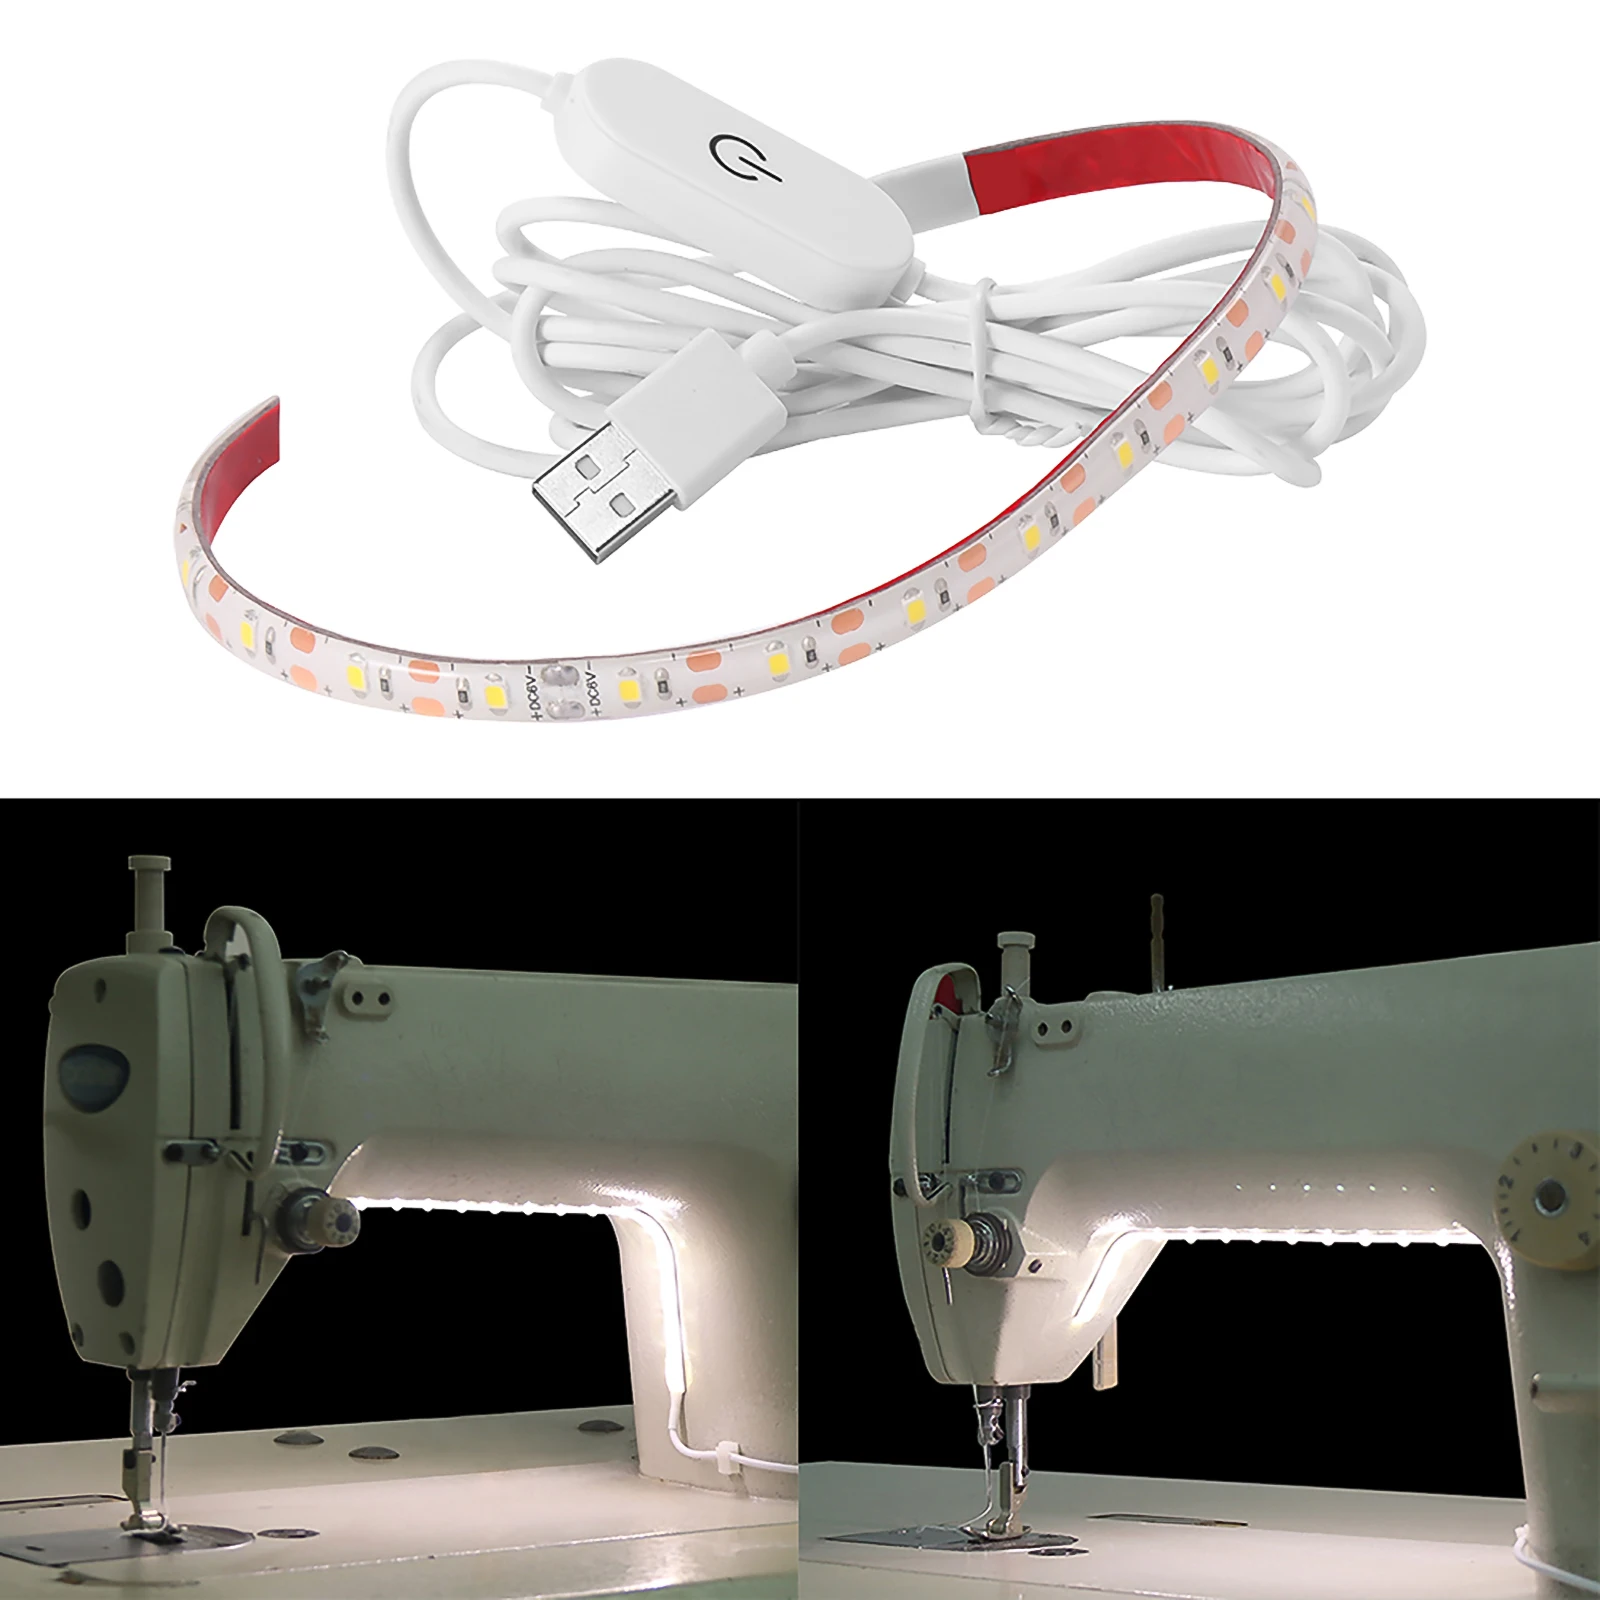 18 LED Industrial Sewing Machine Lighting Lamp USB 5V Powered Clothing Machine Accessories Work Light Flexible Home Decoration